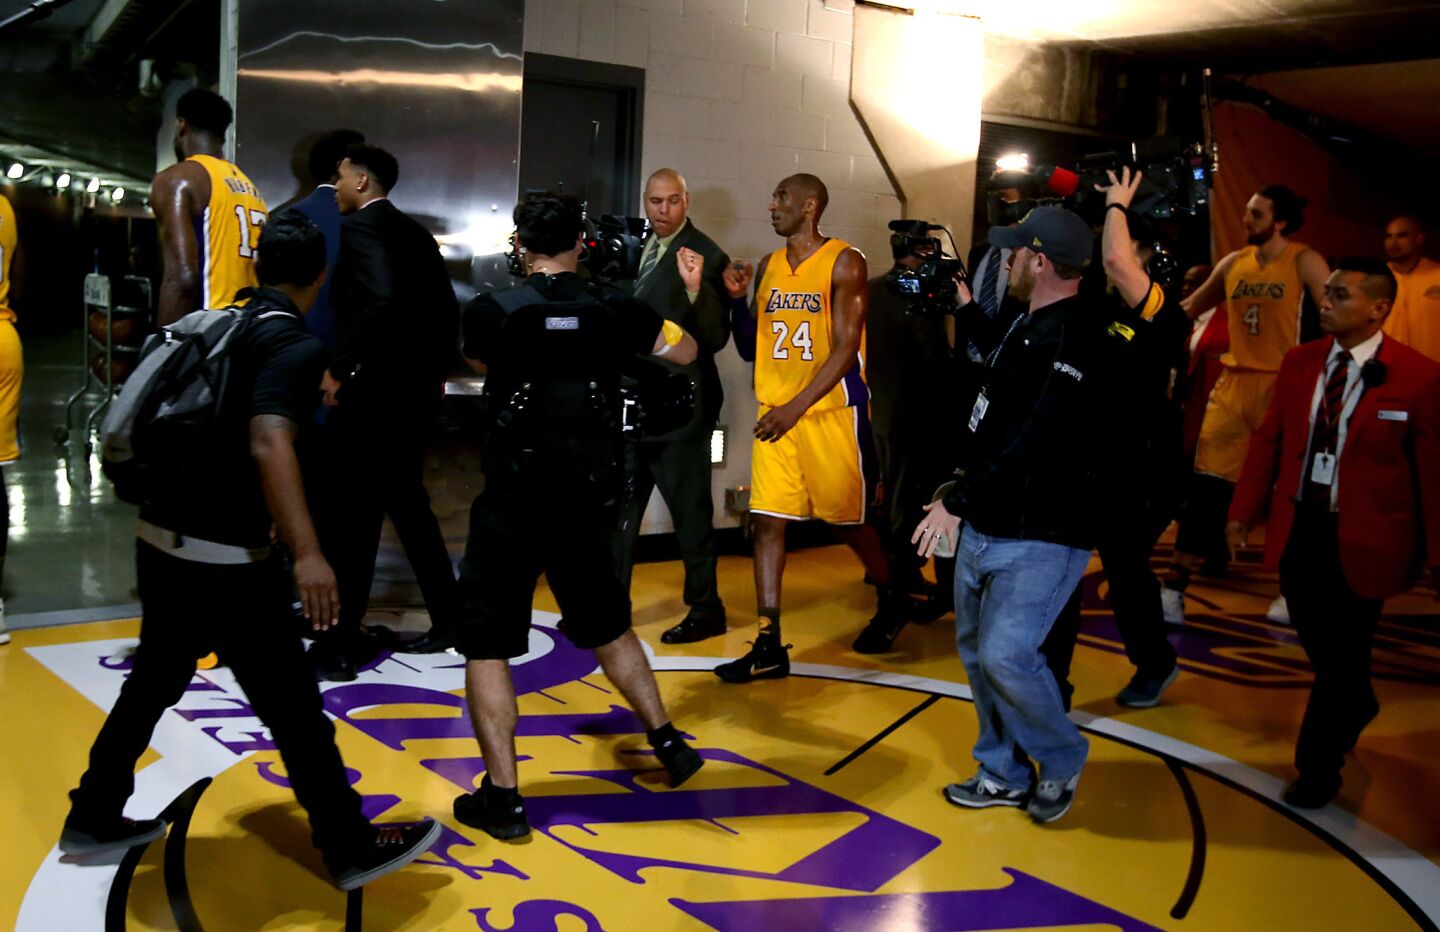 Lakers star Kobe Bryant, center, heads to the locker room after scoring 22 points in the first half of his final game on Wednesday, April 13, 2016, at Staples Center in Los Angeles.